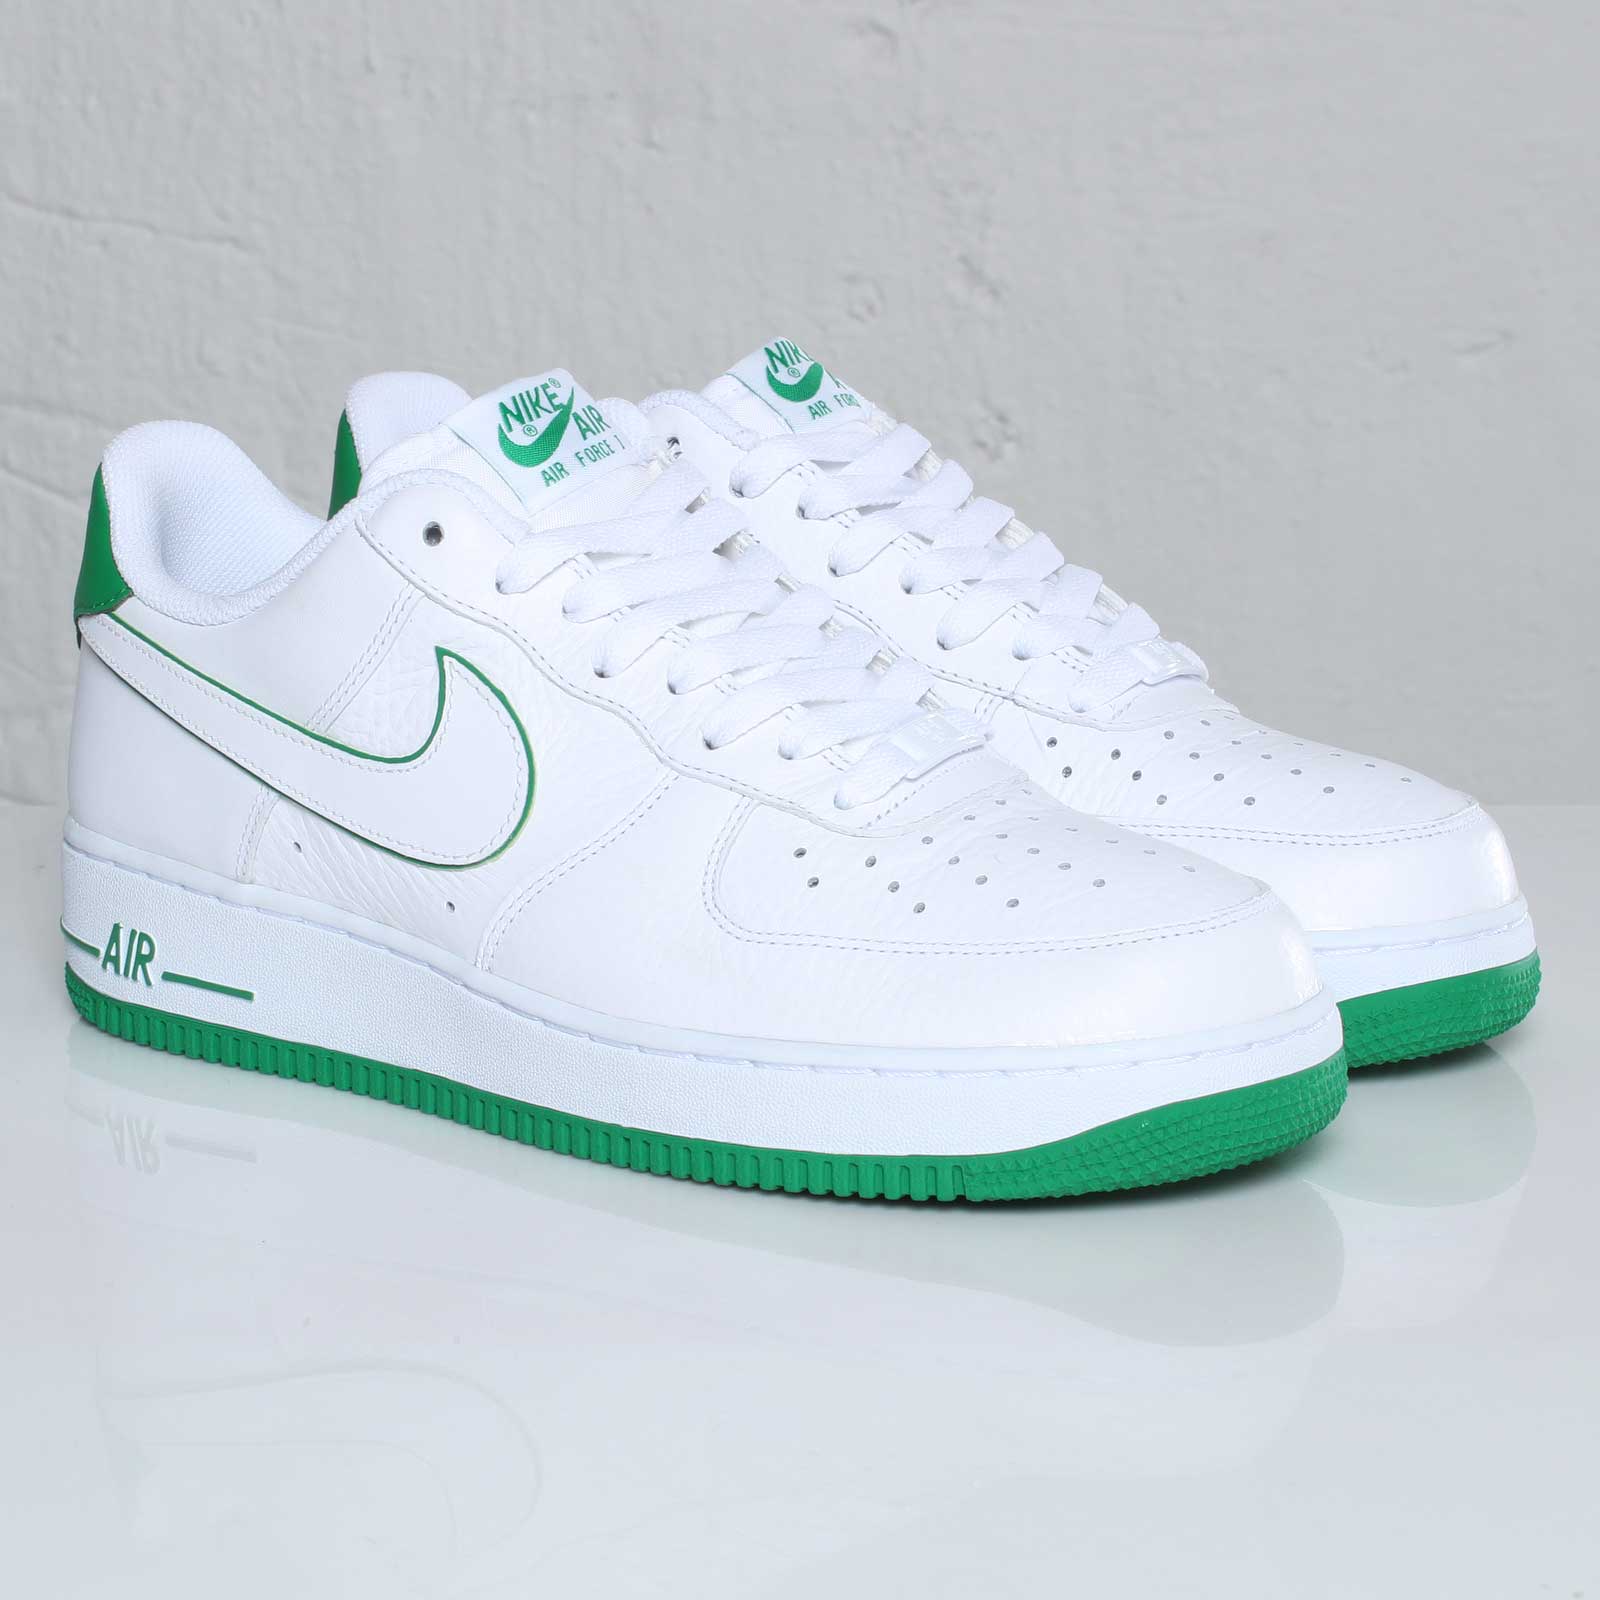 Nike Air Force 1 Low 'White/Court Green 